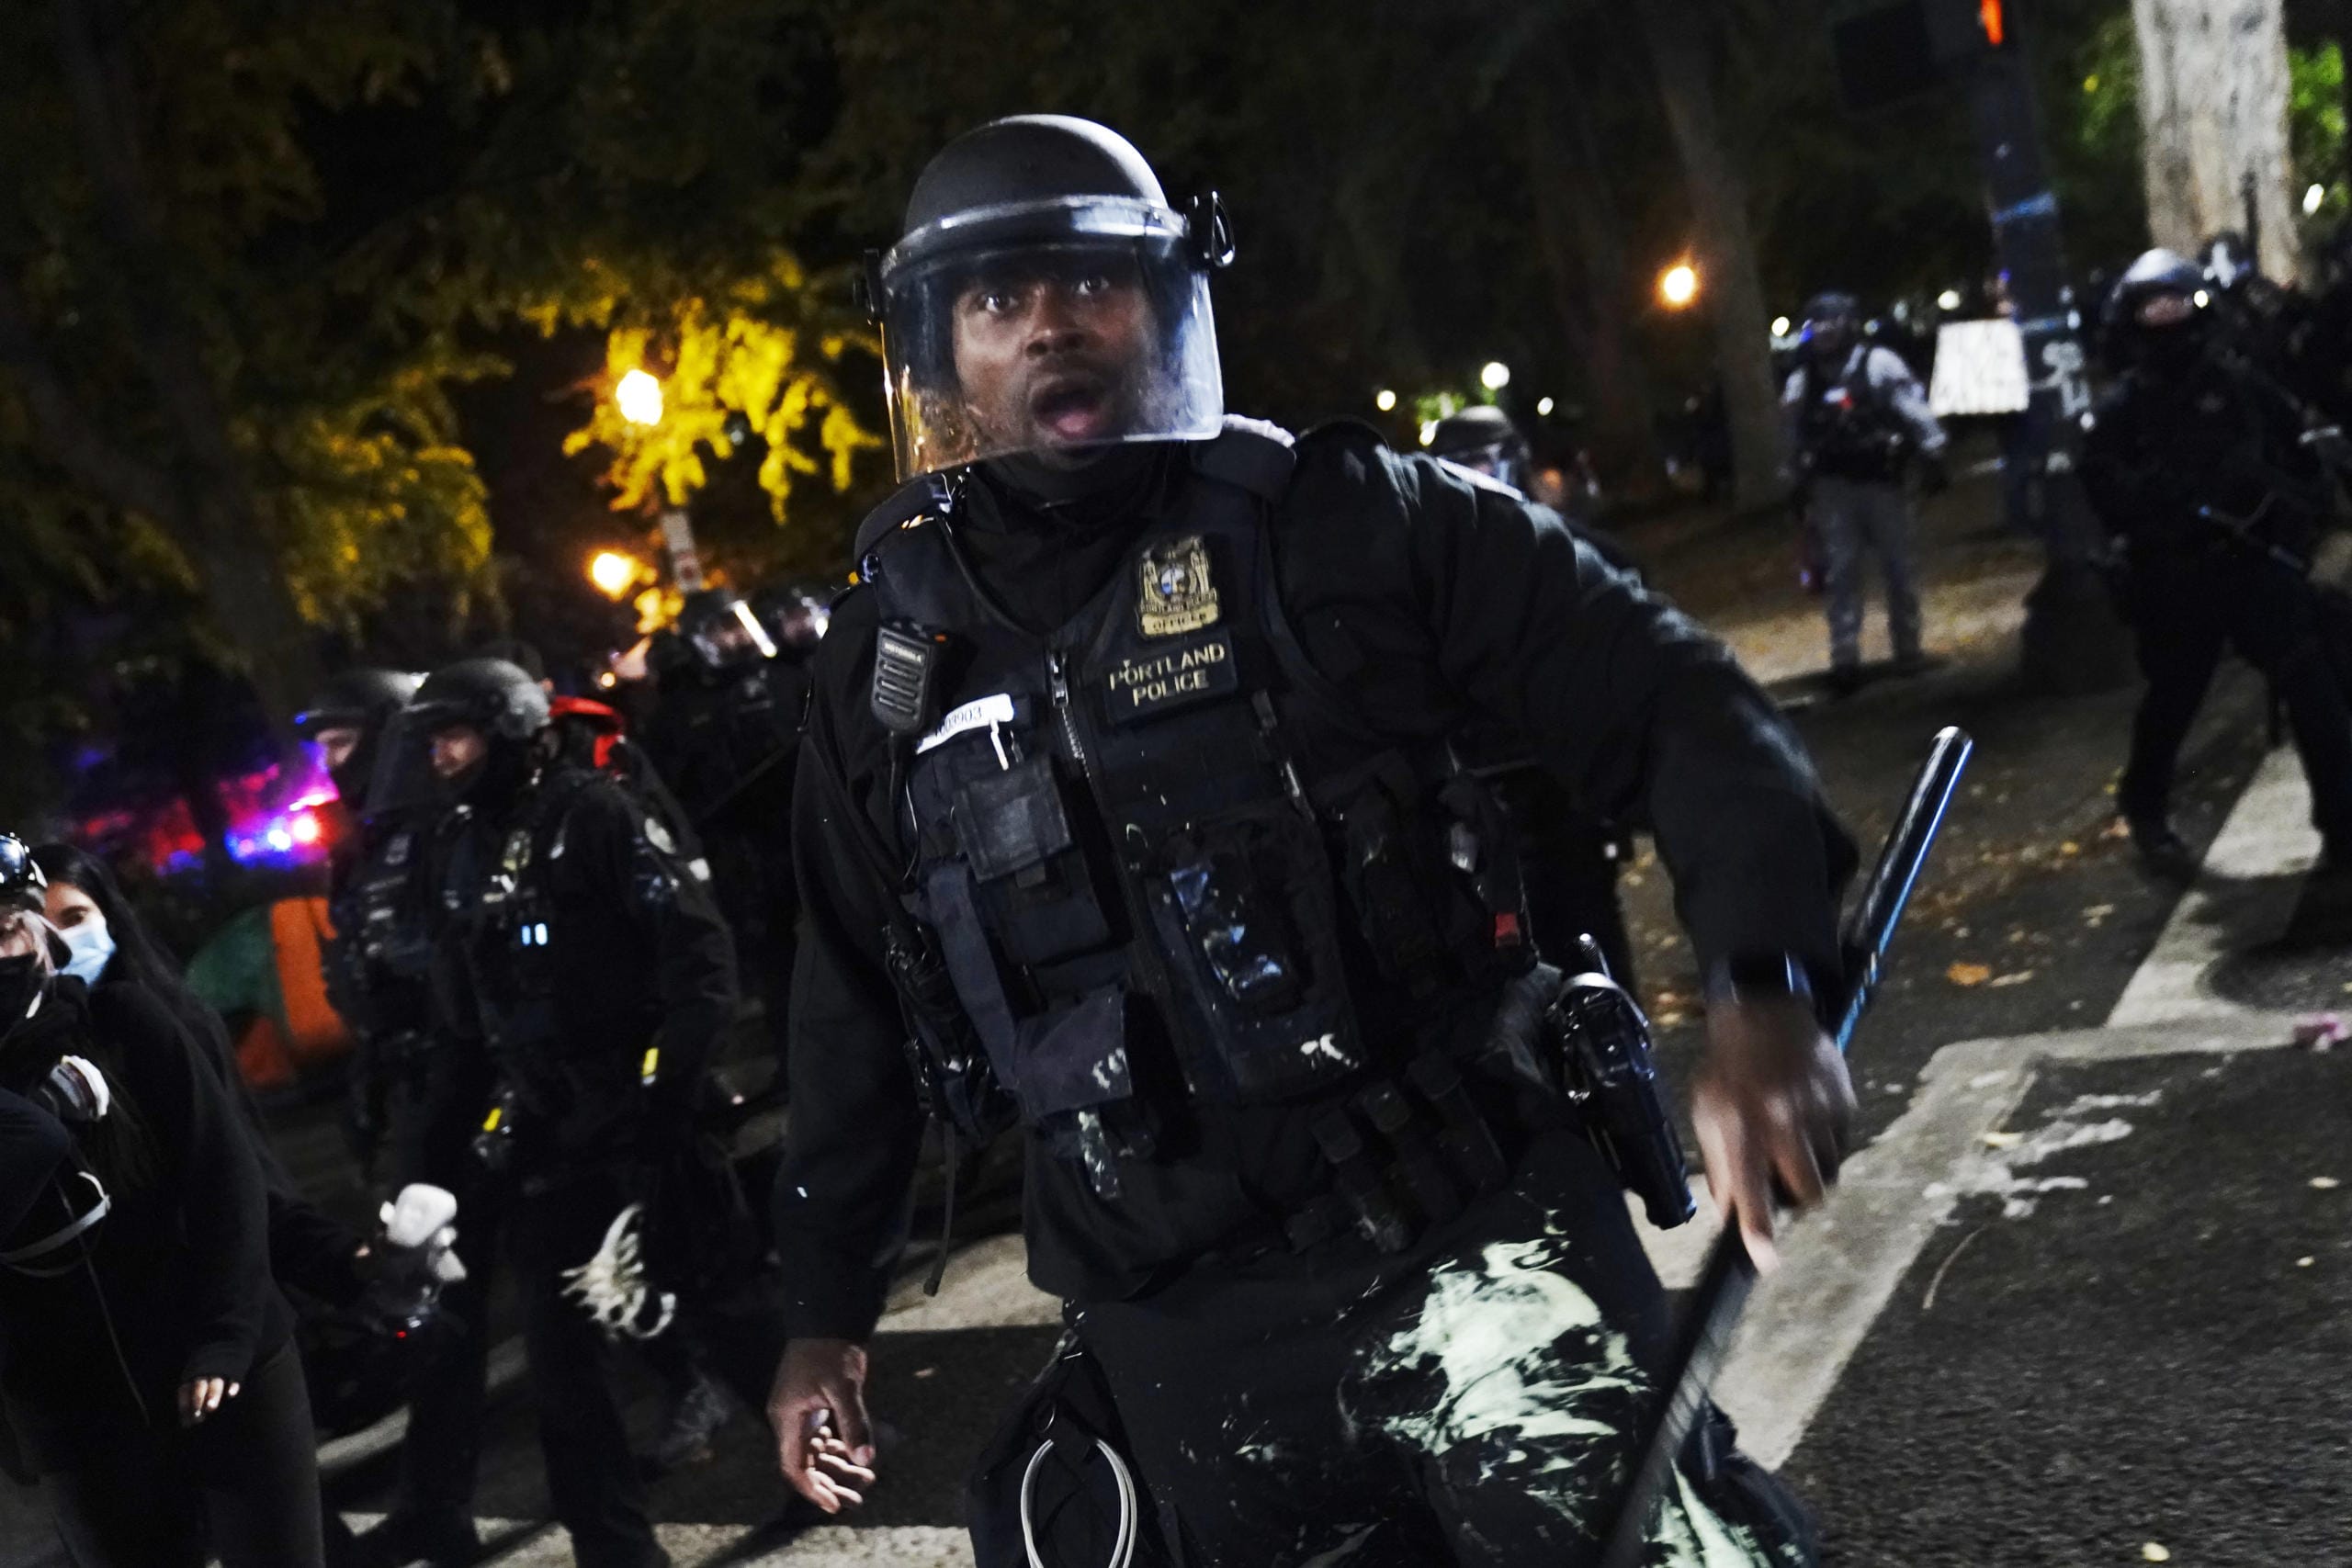 A Portland police officer pushes back protesters, Saturday, Sept. 26, 2020, in Portland. The protests, which began over the killing of George Floyd, often result frequent clashes between protesters and law enforcement.